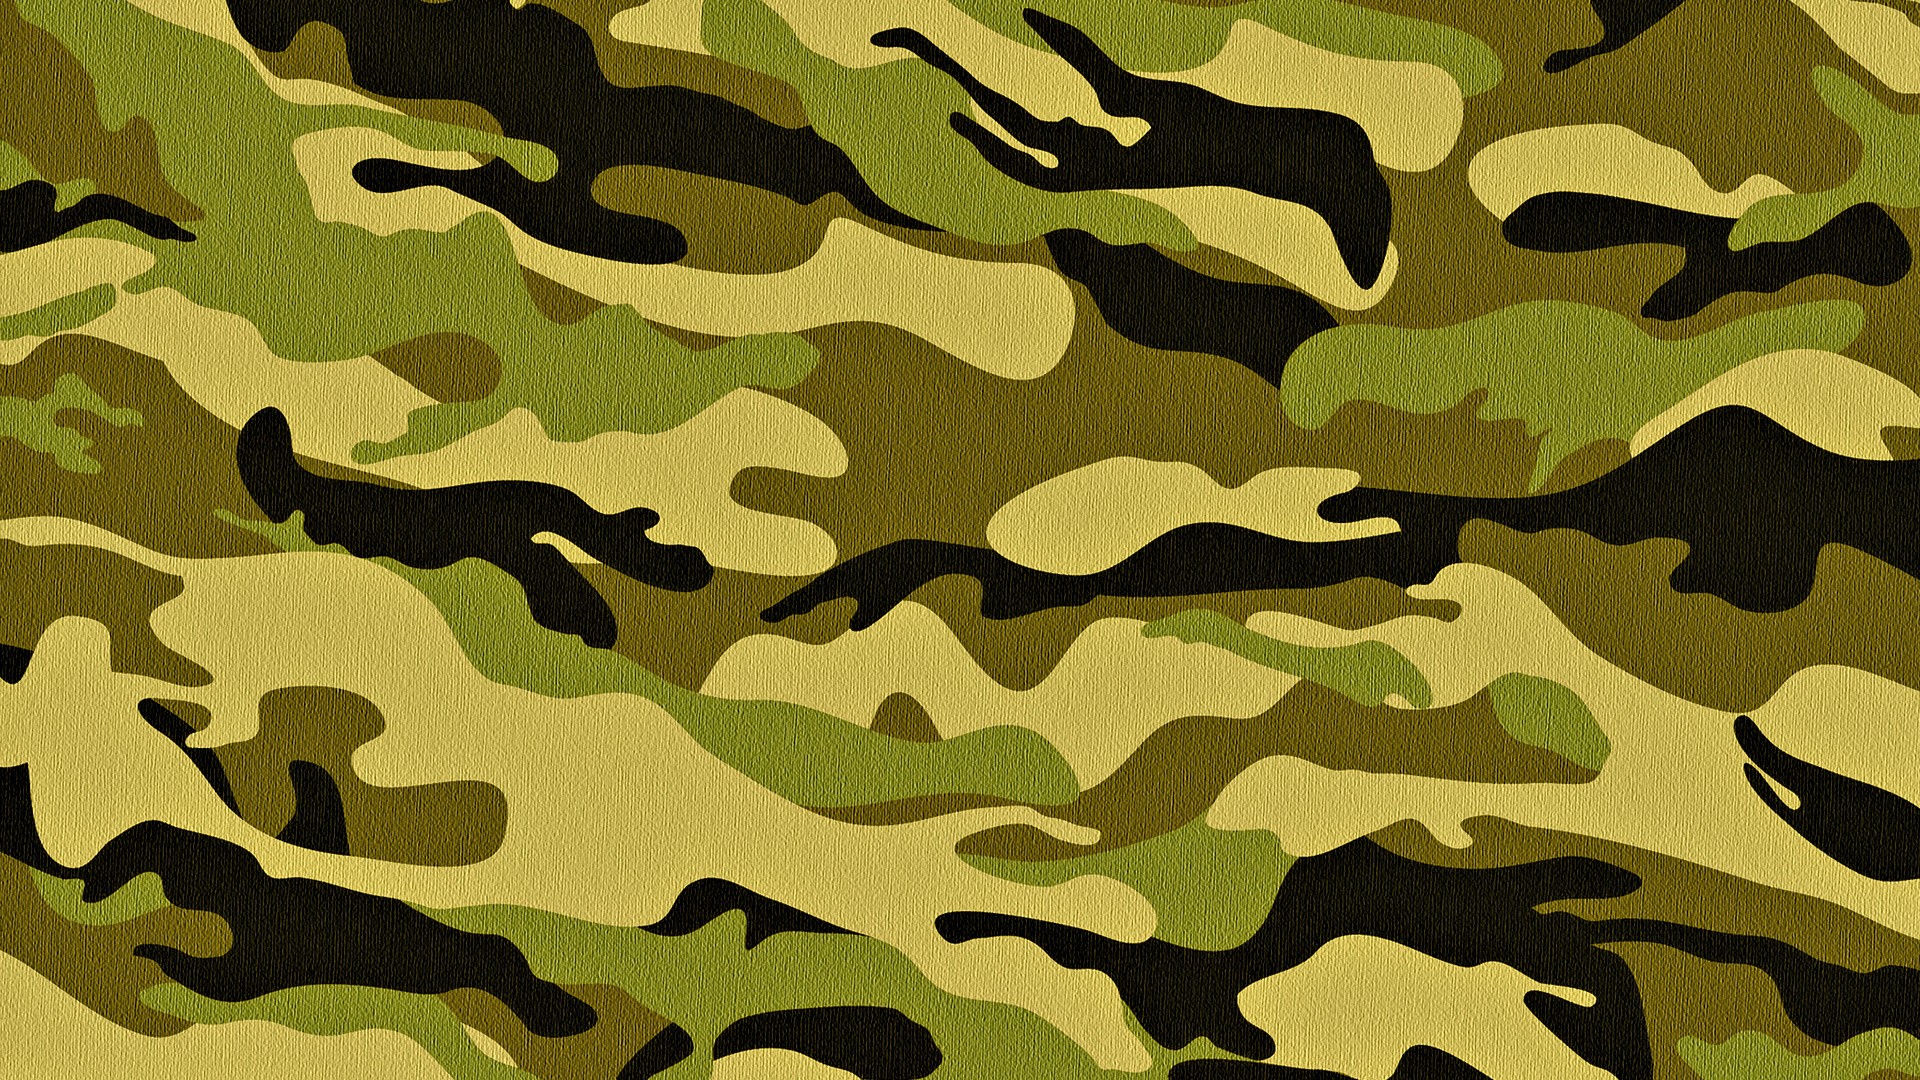  the army wallpapers category of free hd wallpapers army camouflage